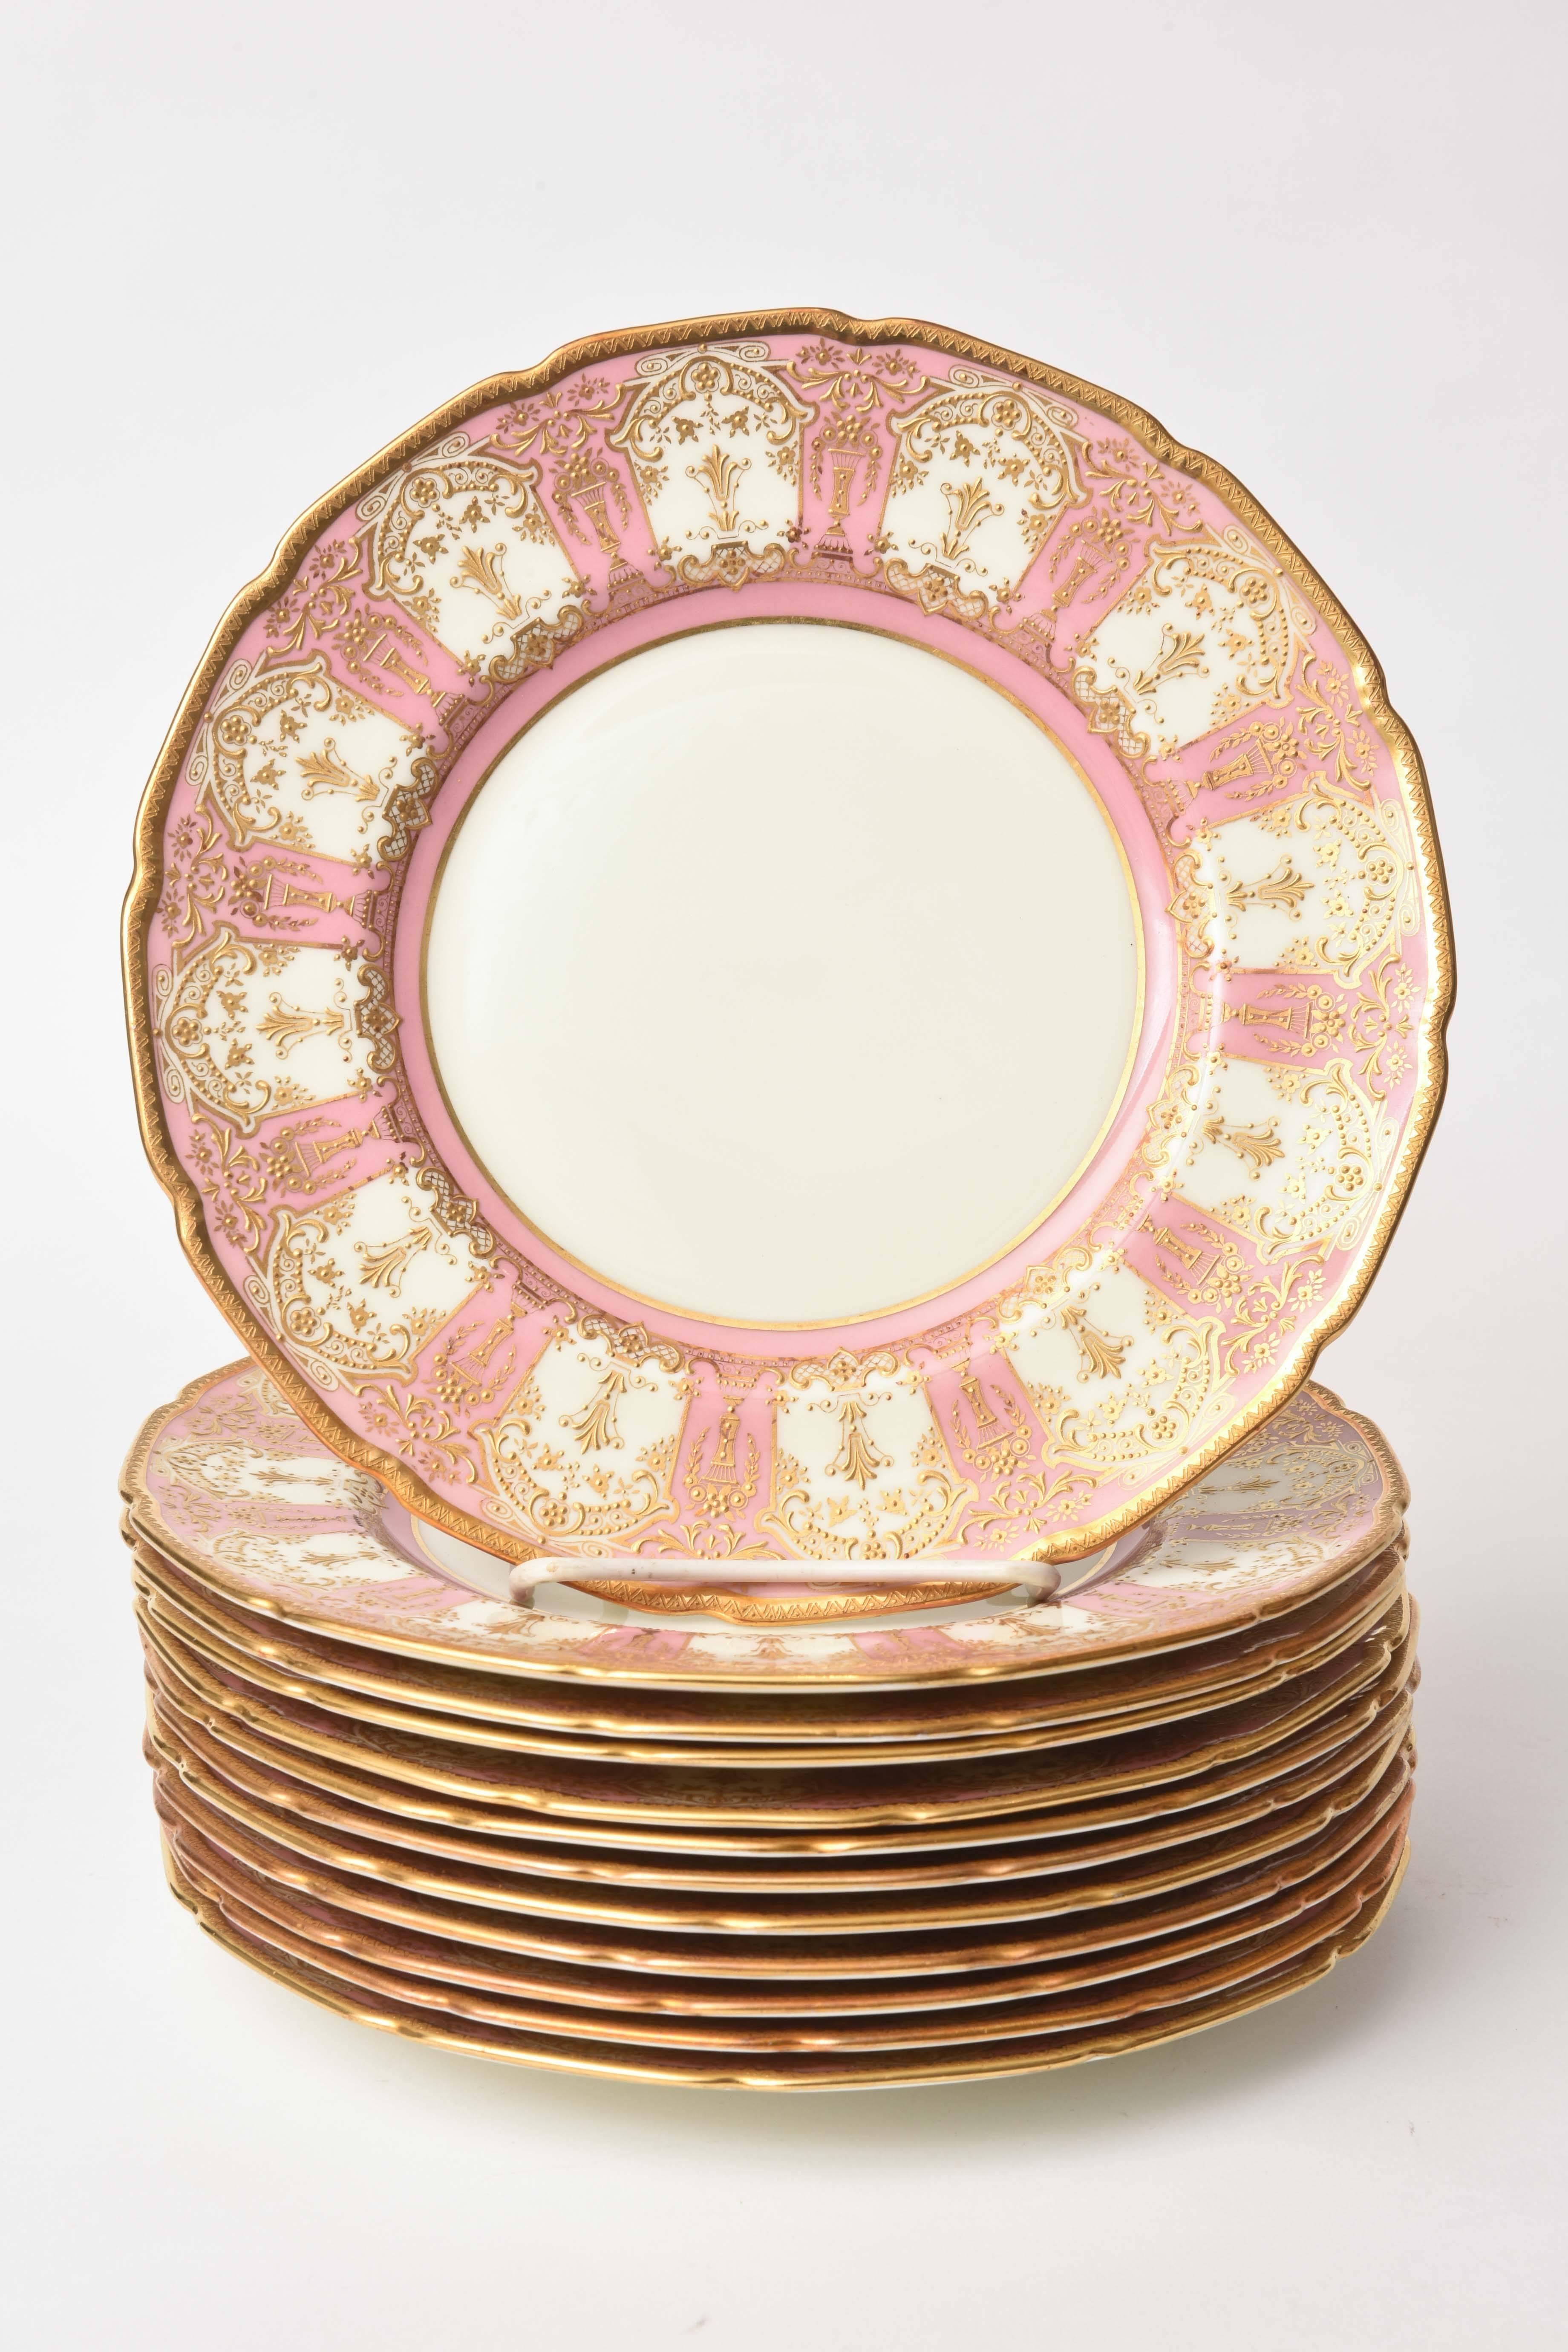 Early 20th Century 12 Exquisite Pink and Heavily Gilded Dessert or Salad Plates, Antique English